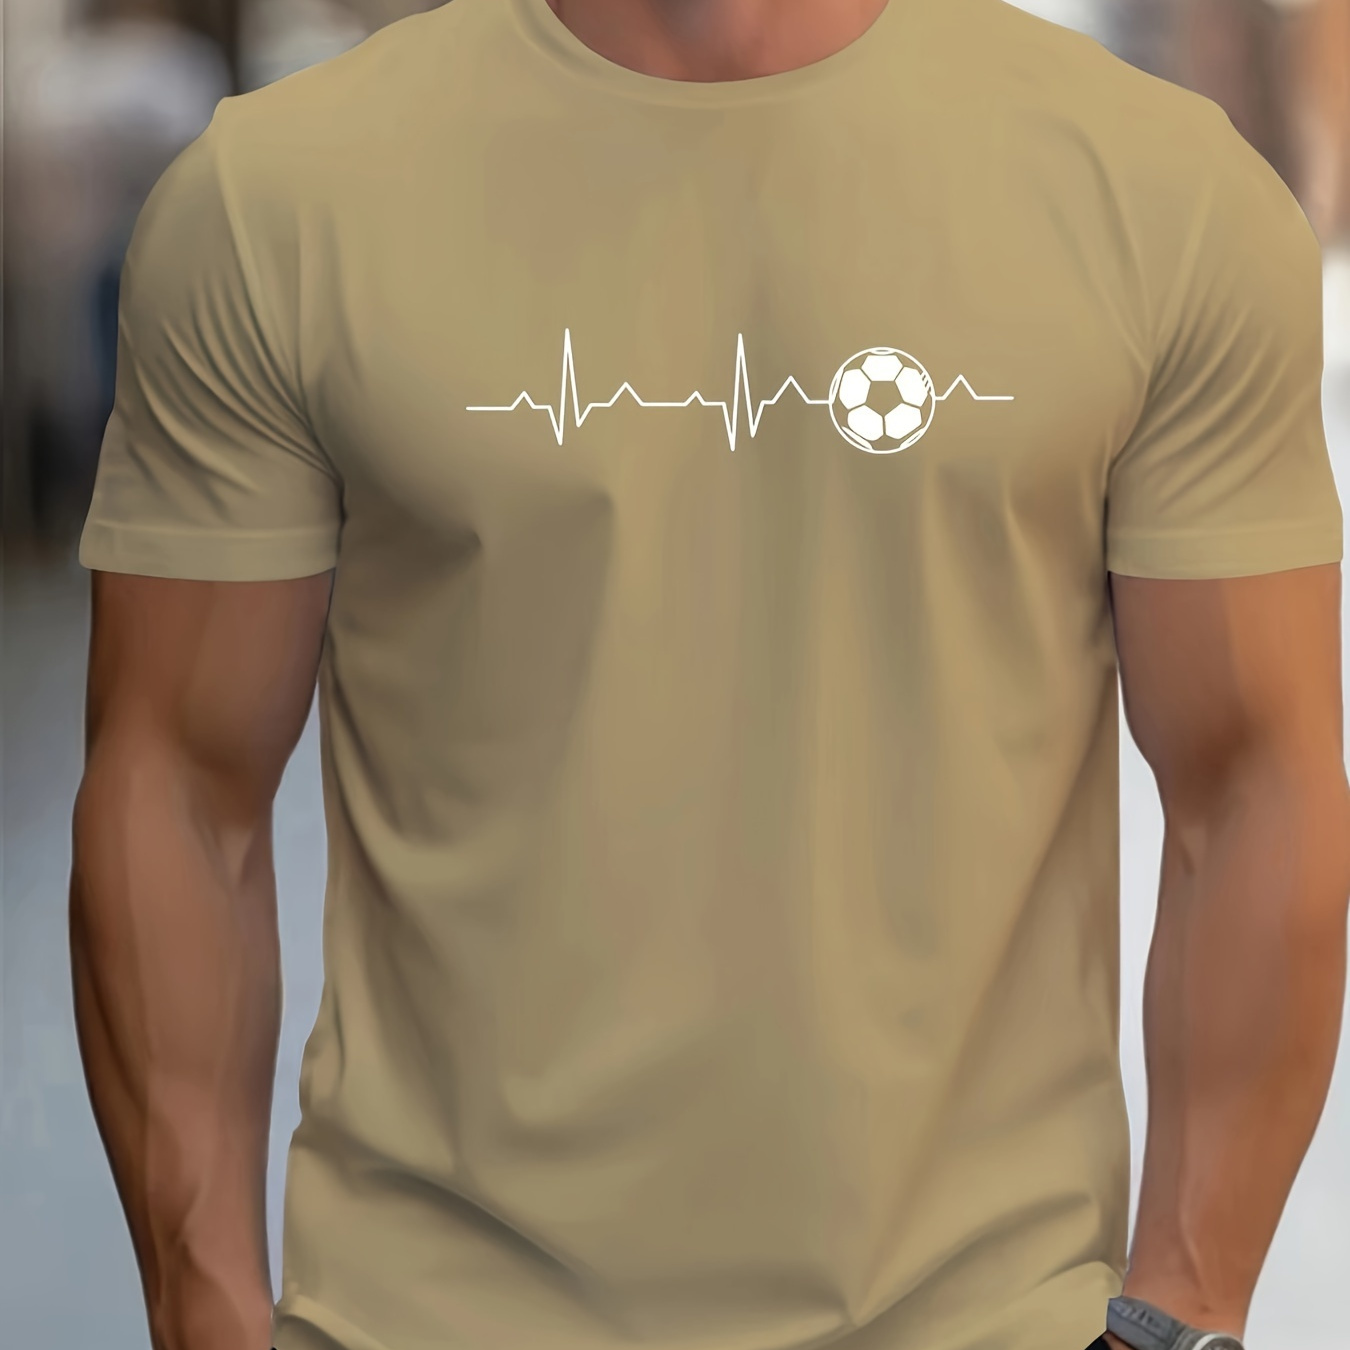 

Football Heartbeat Print Short Sleeve Tees For Men, Casual Crew Neck T-shirt, Comfortable Breathable T-shirt